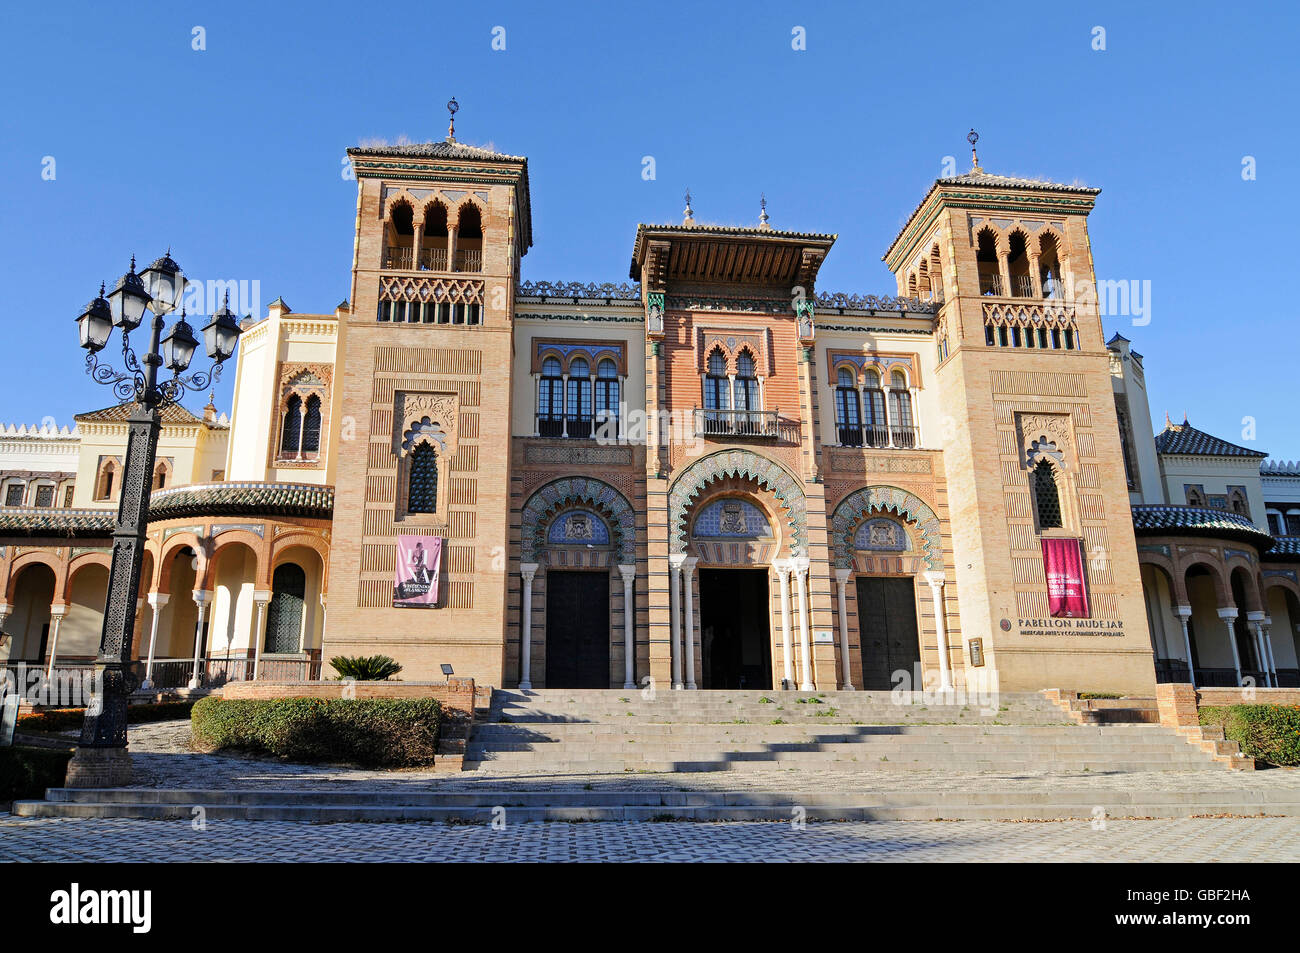 Museo de Artes Populares y Costumbres, museum of arts and folklore, Pabellón Mudejar, Seville, Seville province, Andalucia, Spain, Europe Stock Photo